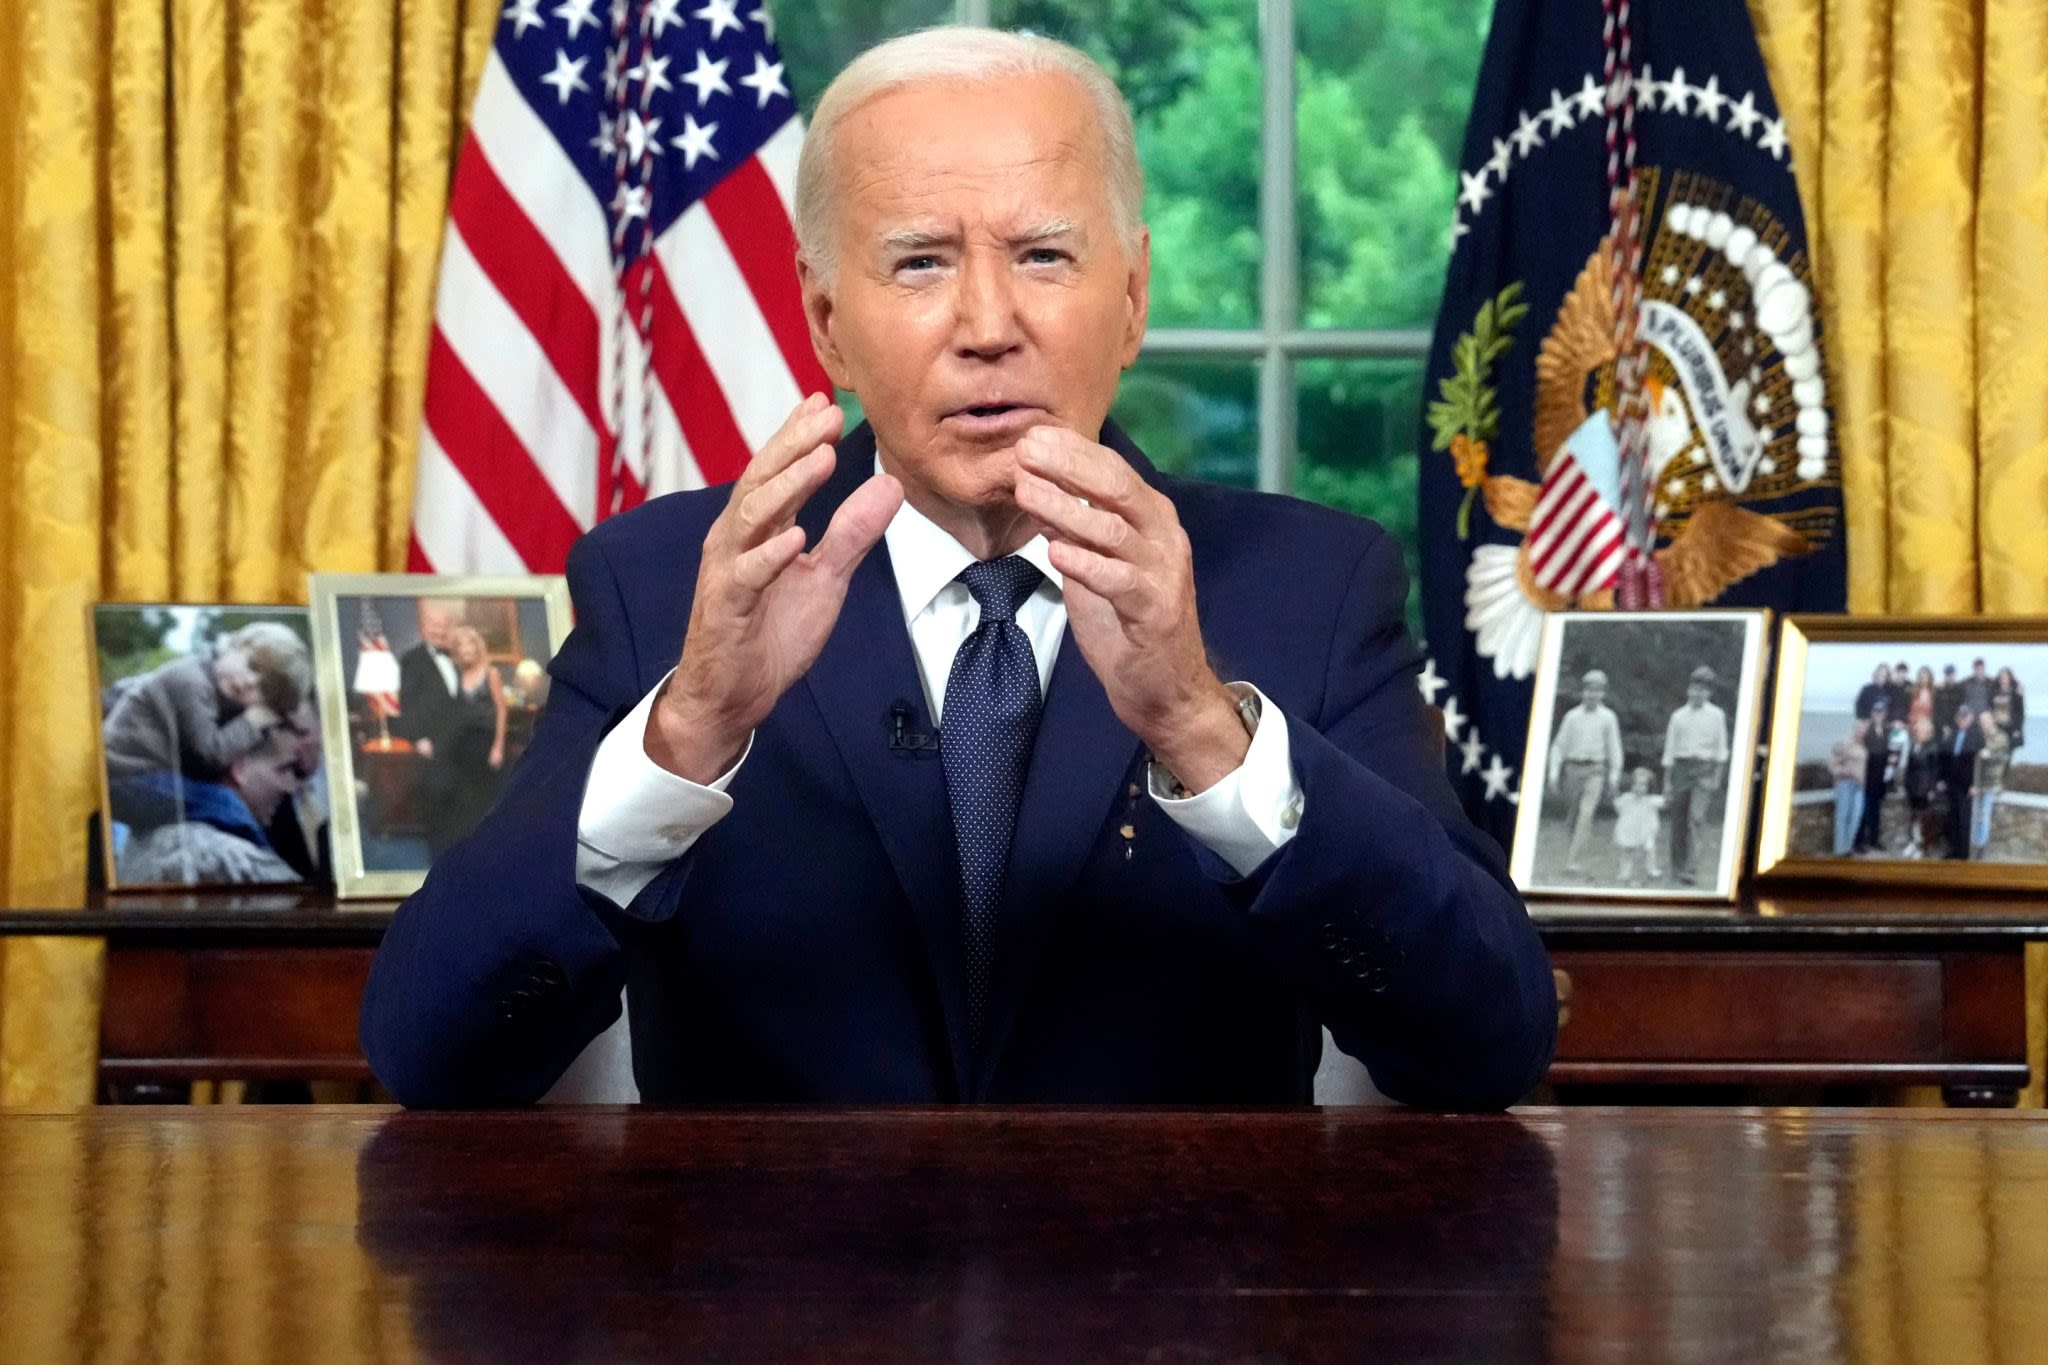 How to watch President Joe Biden’s speech on his decision to end his reelection bid live online for free—without cable